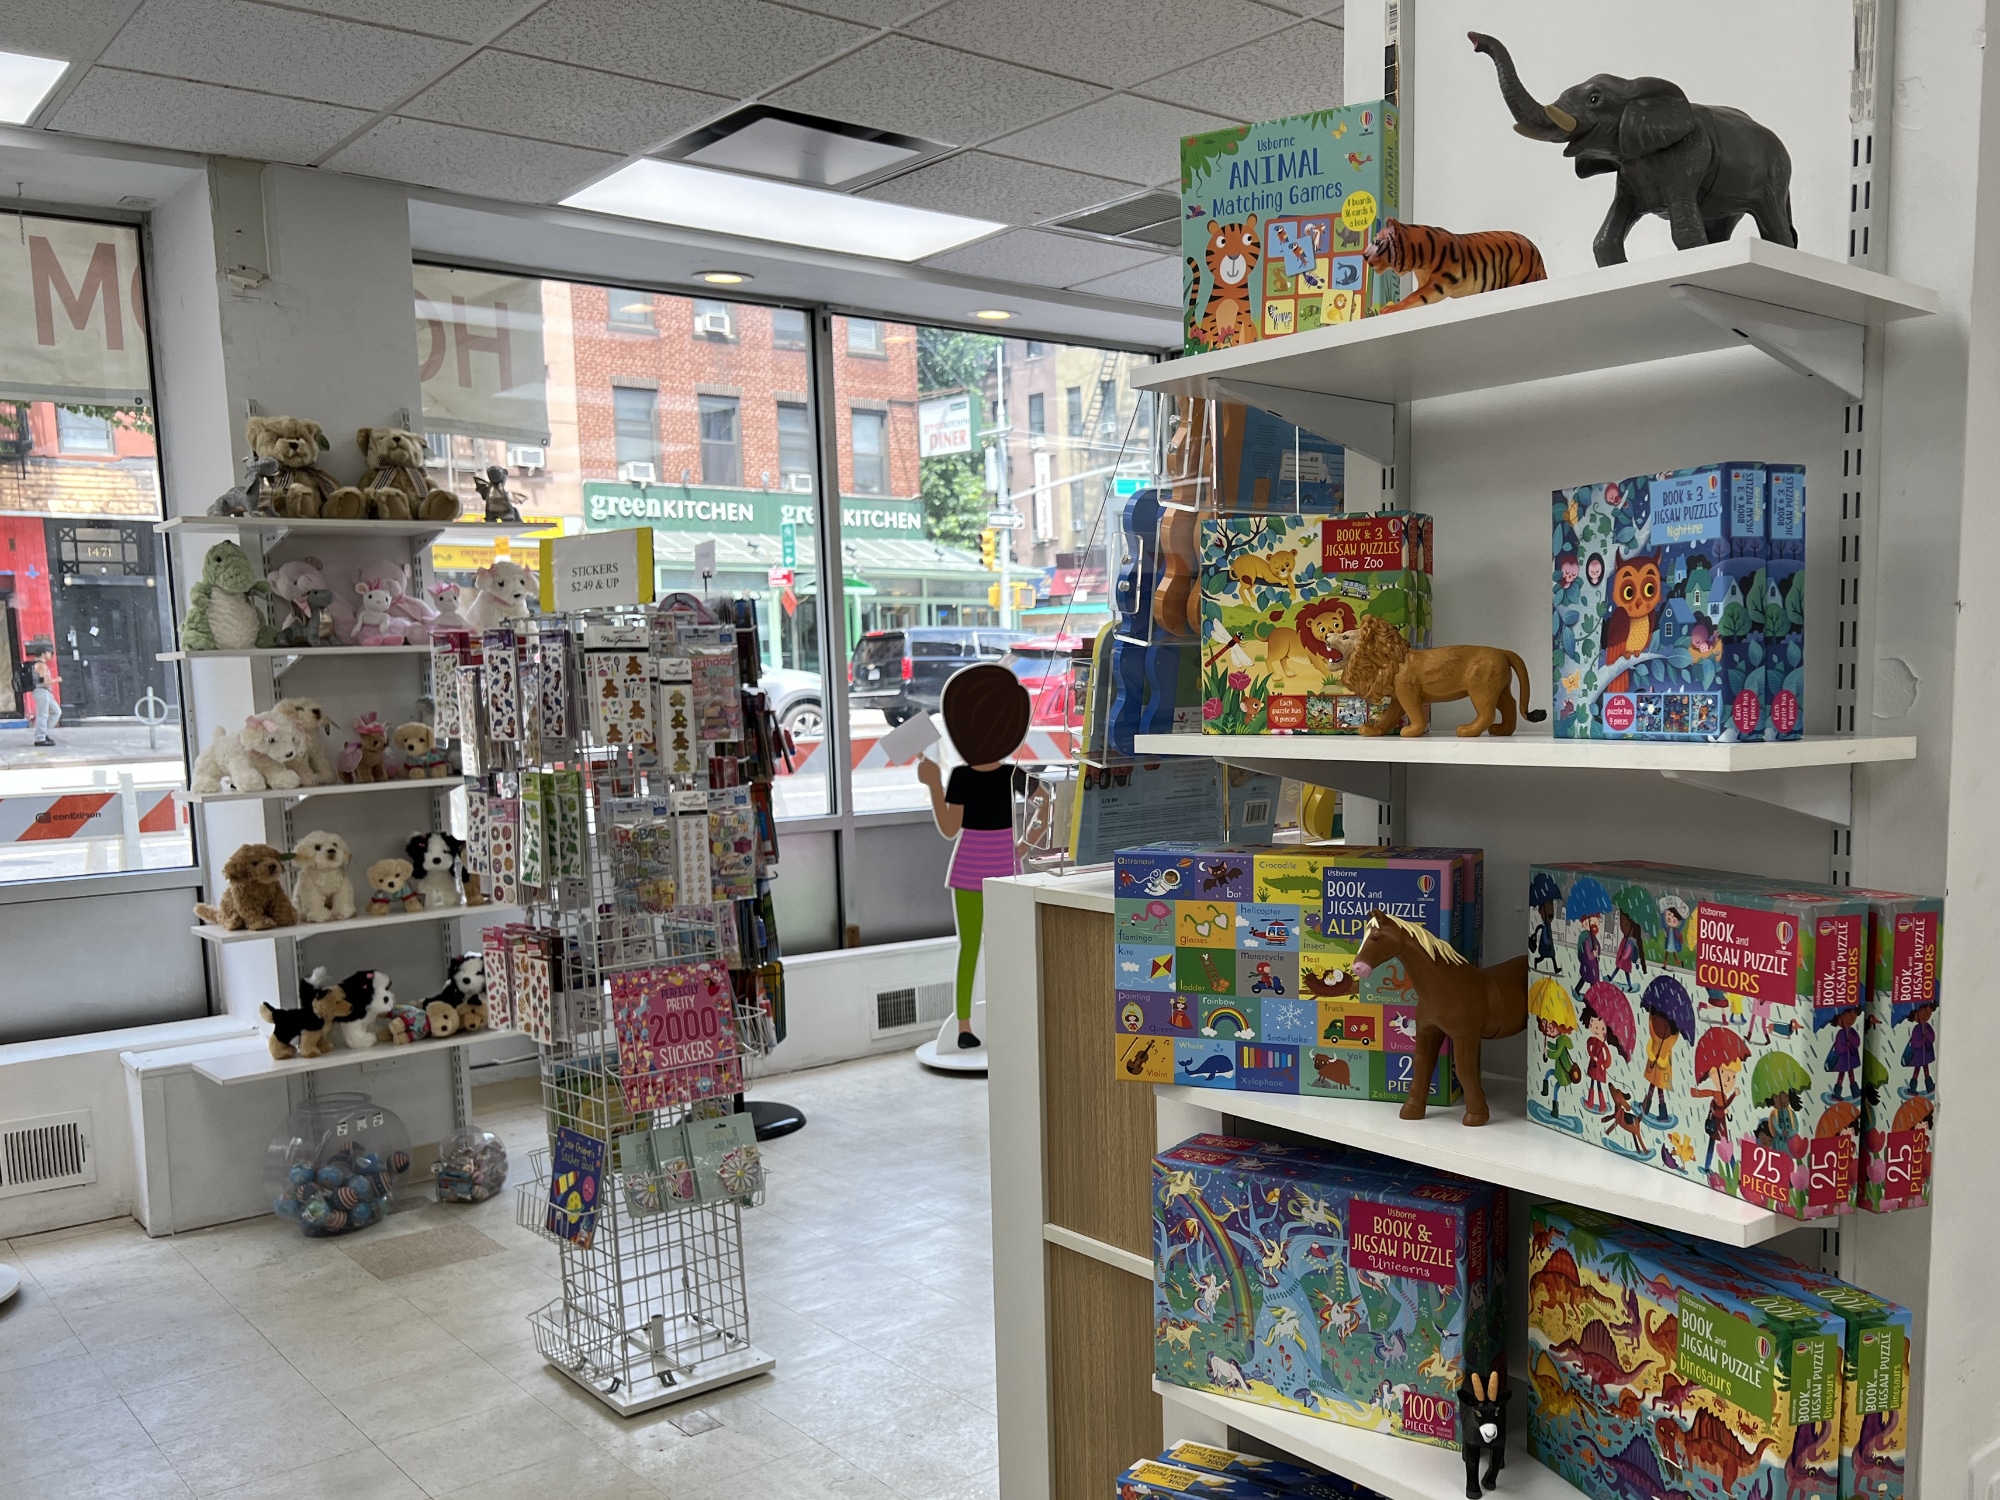 HomBom Toys is having a soft opening at its store, located at 1470 First Avenue | Upper East Site